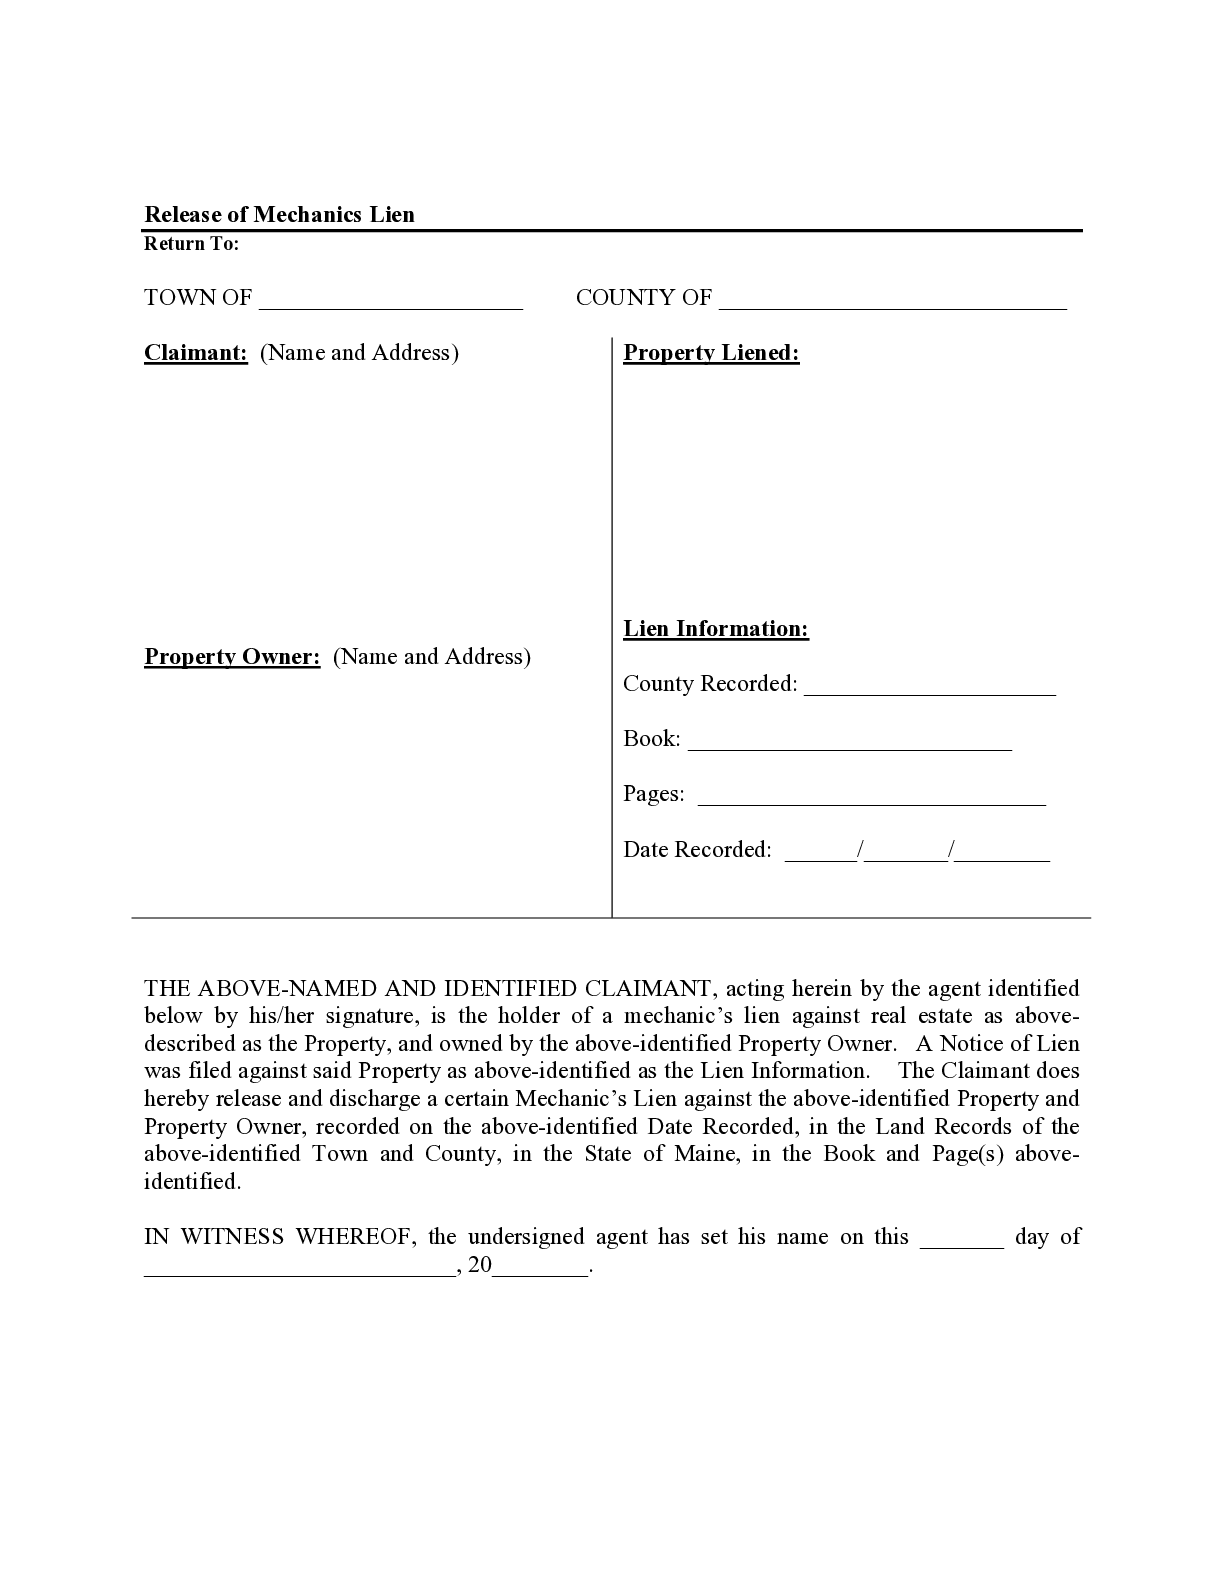 Maine Mechanics Lien Release Form - free from